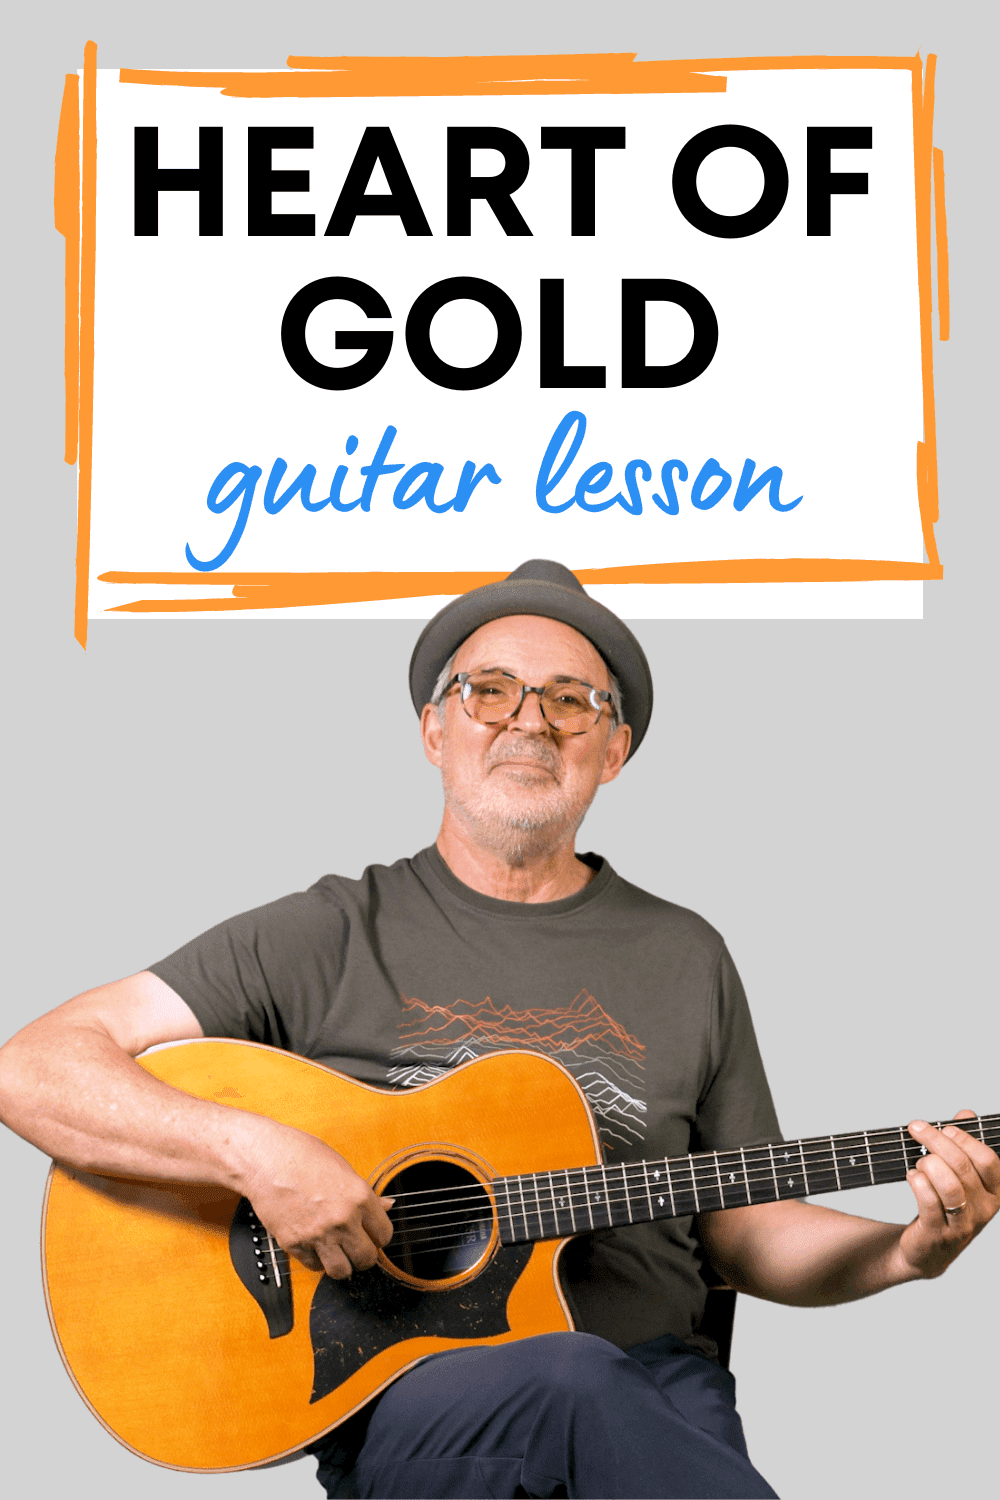 HEART OF GOLD GUITAR LESSON